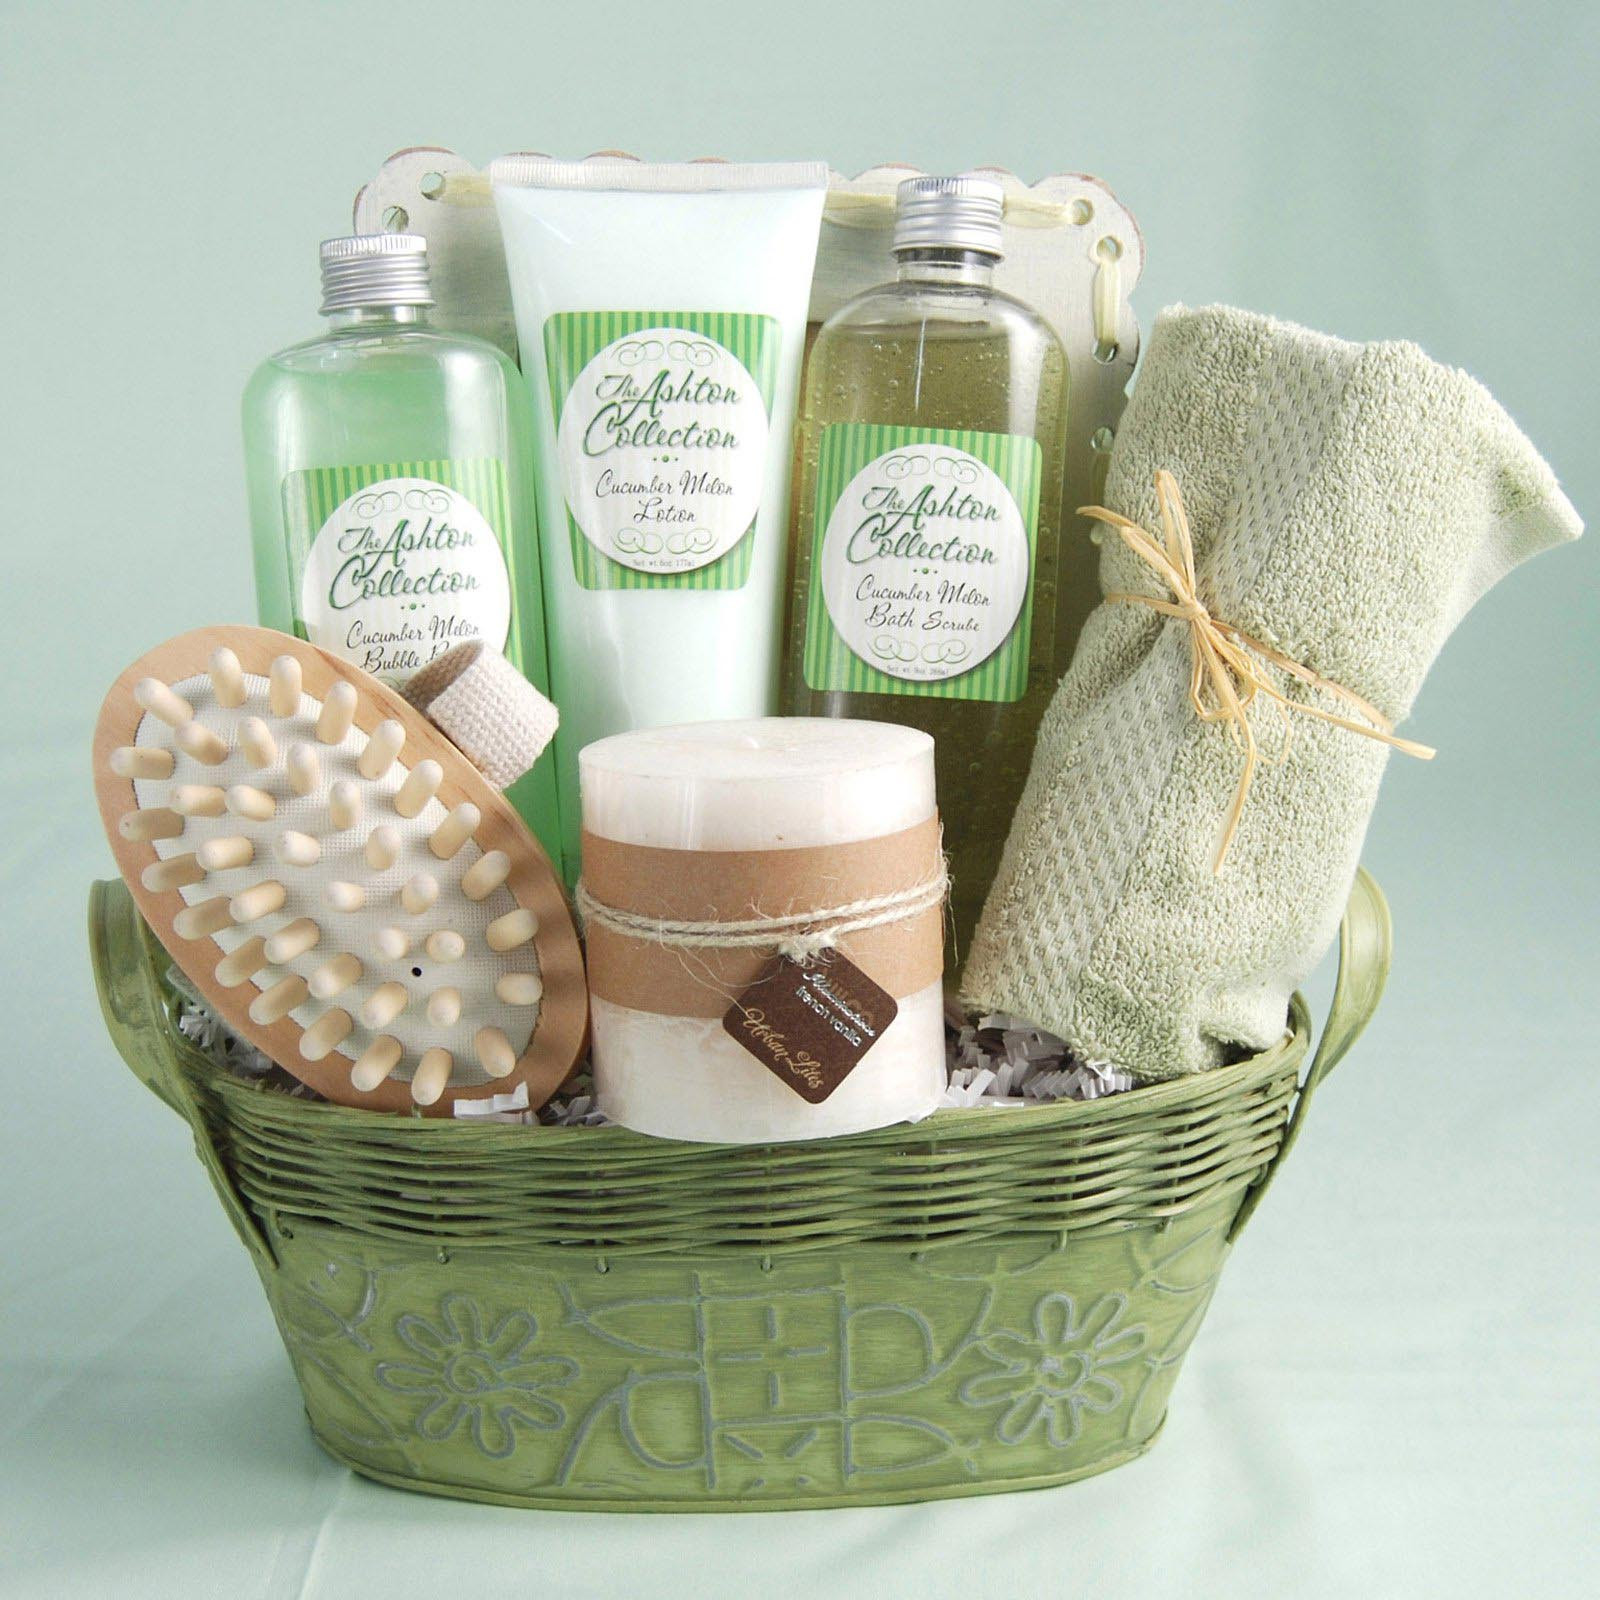 Spa Basket Gift Ideas
 Spa Gift Baskets for Relaxing